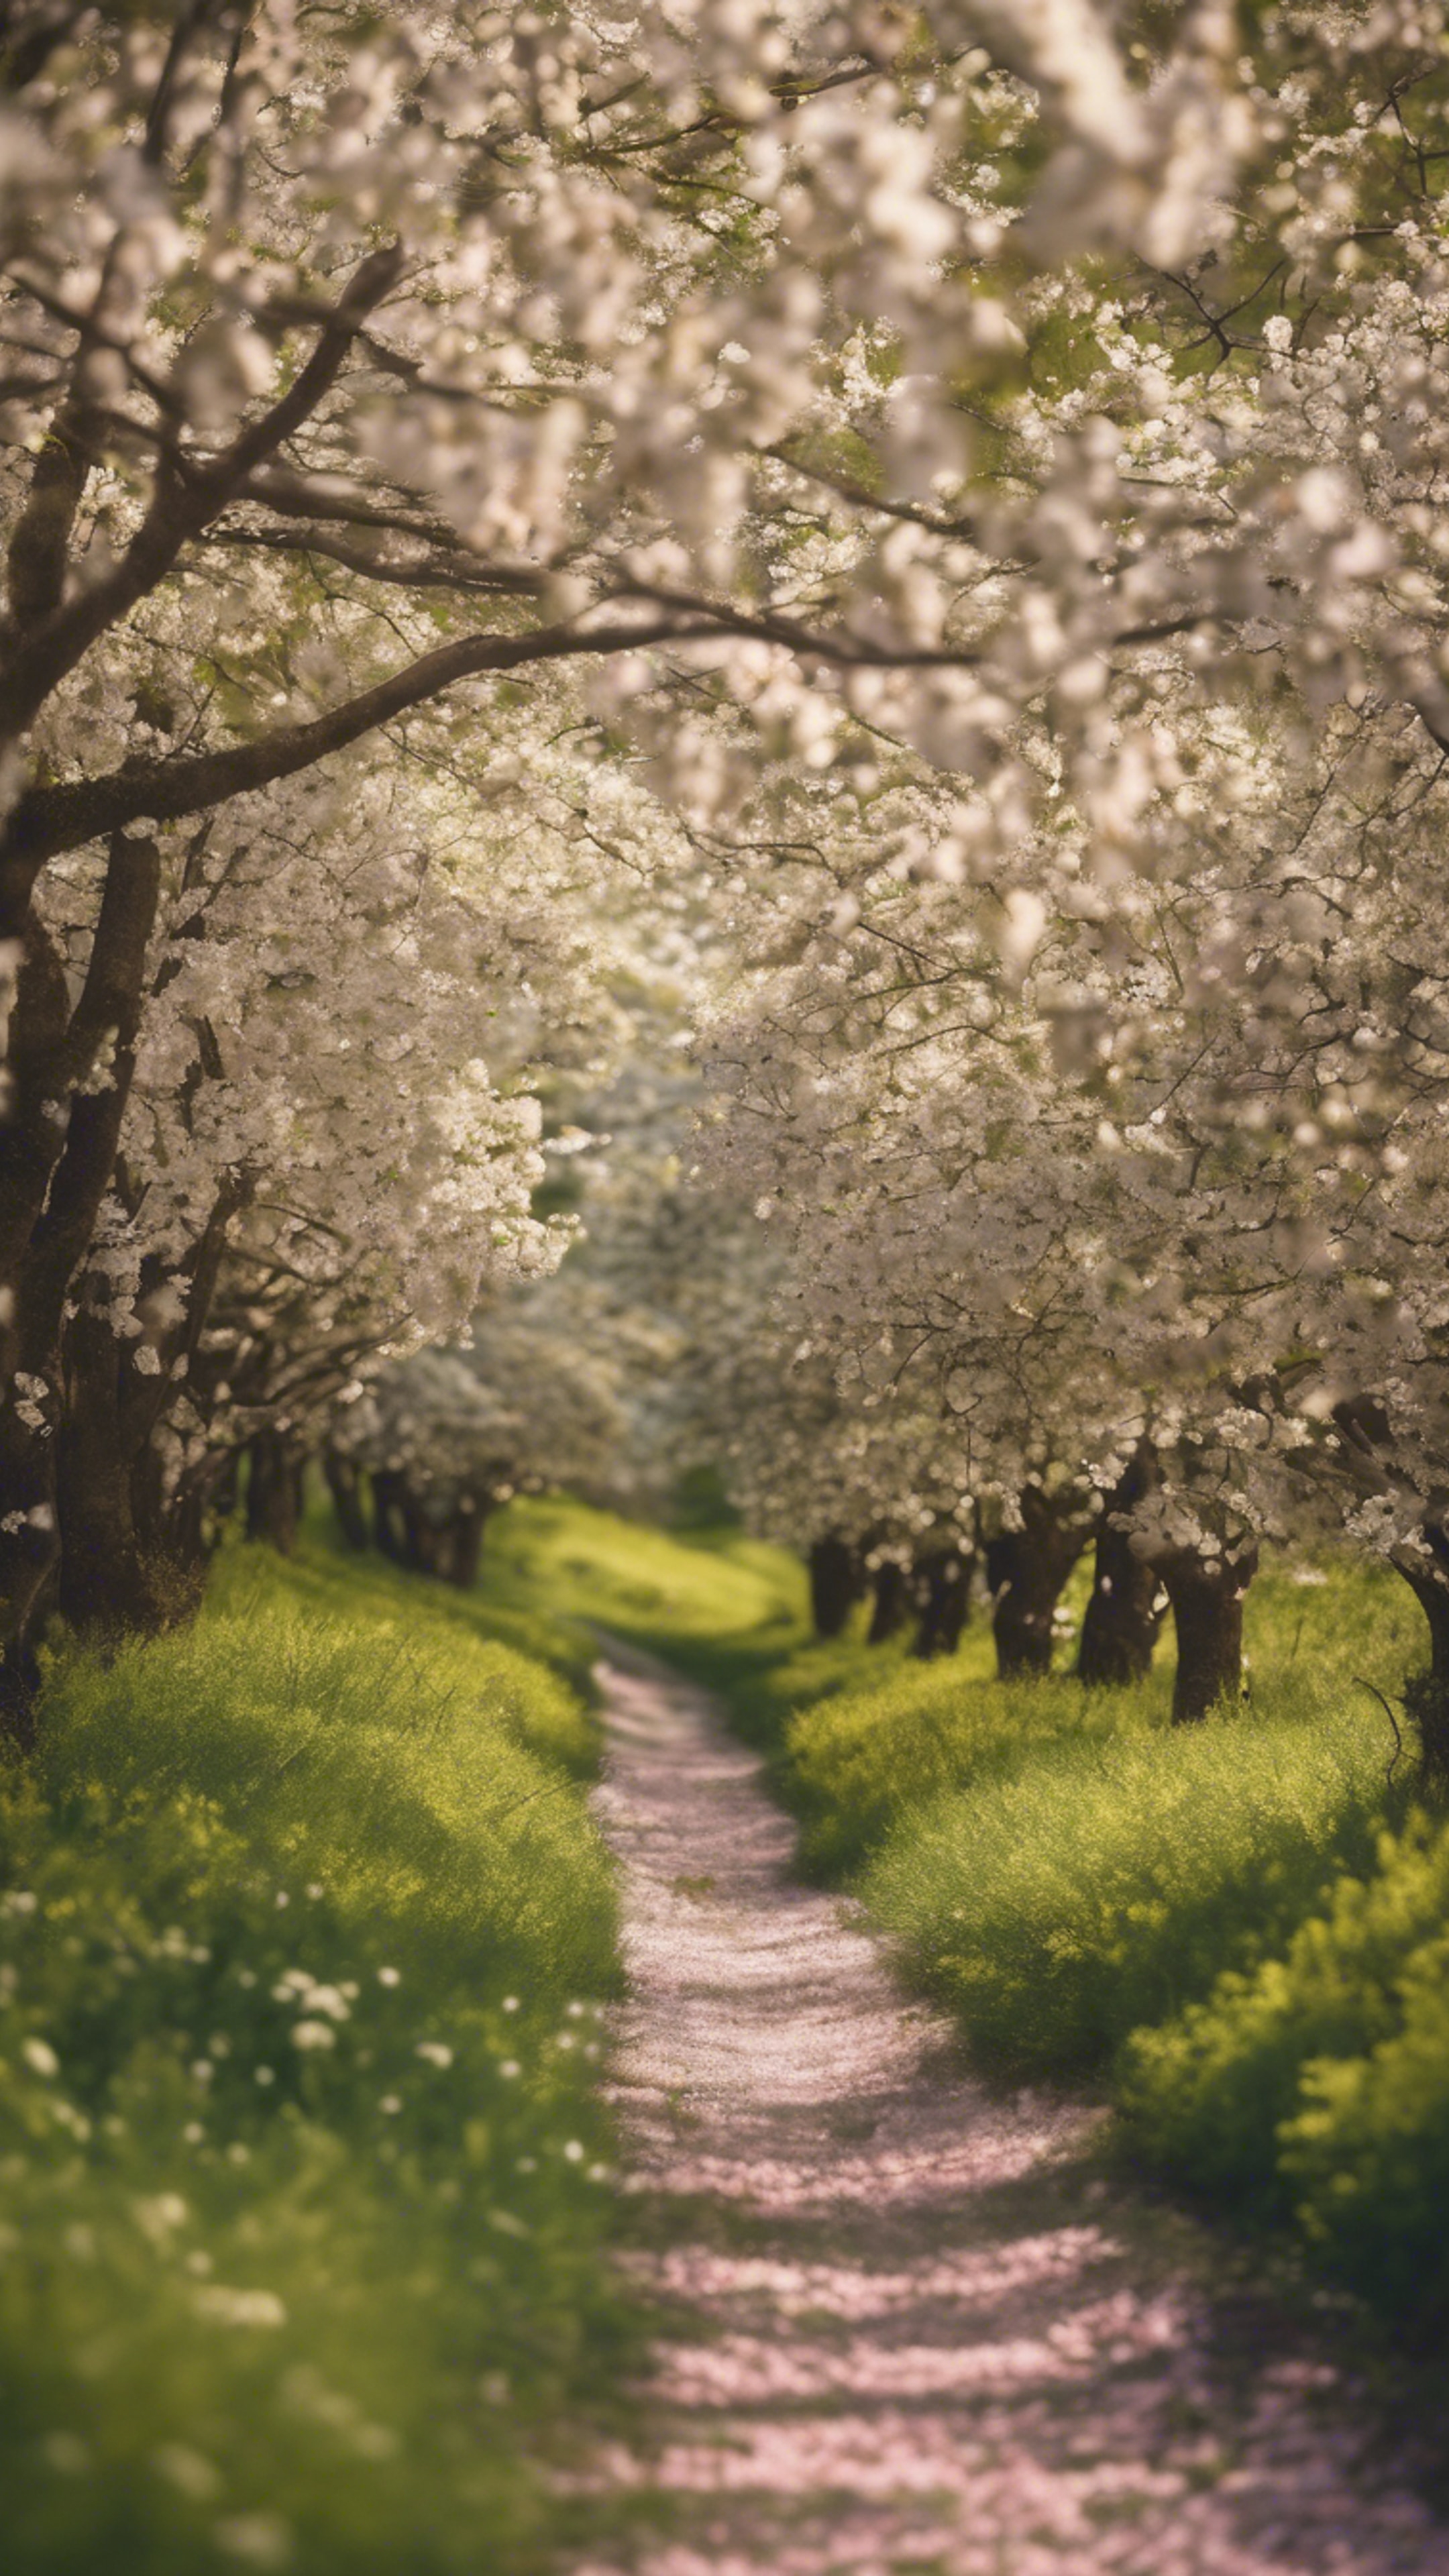 A grassy path winding through a forest of flowering dogwood trees.壁紙[d373734920ac4560a386]